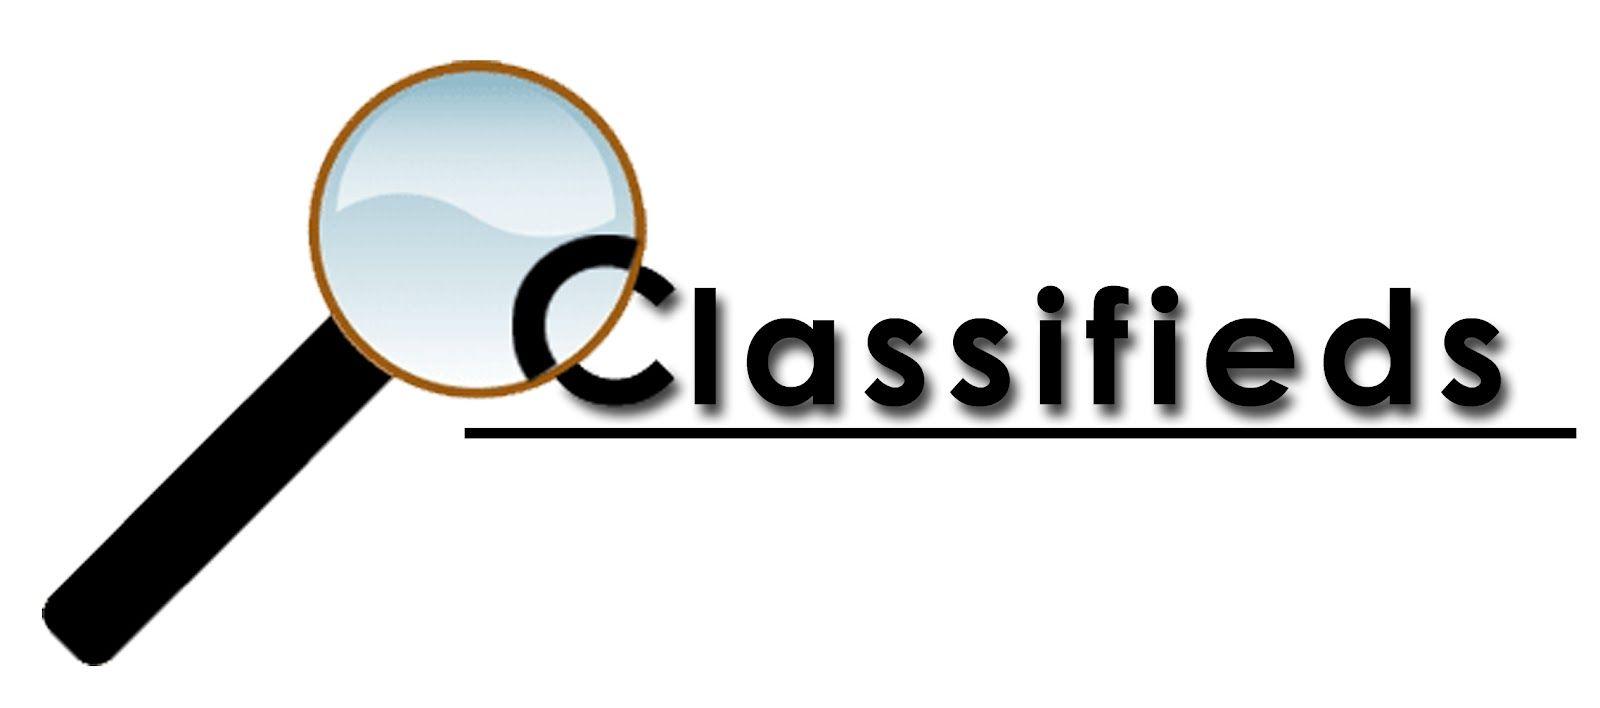 Web Ad Logo - Post 80 Ads To Top Classified USA, UK, CANADA Ad Posting Sites. for ...